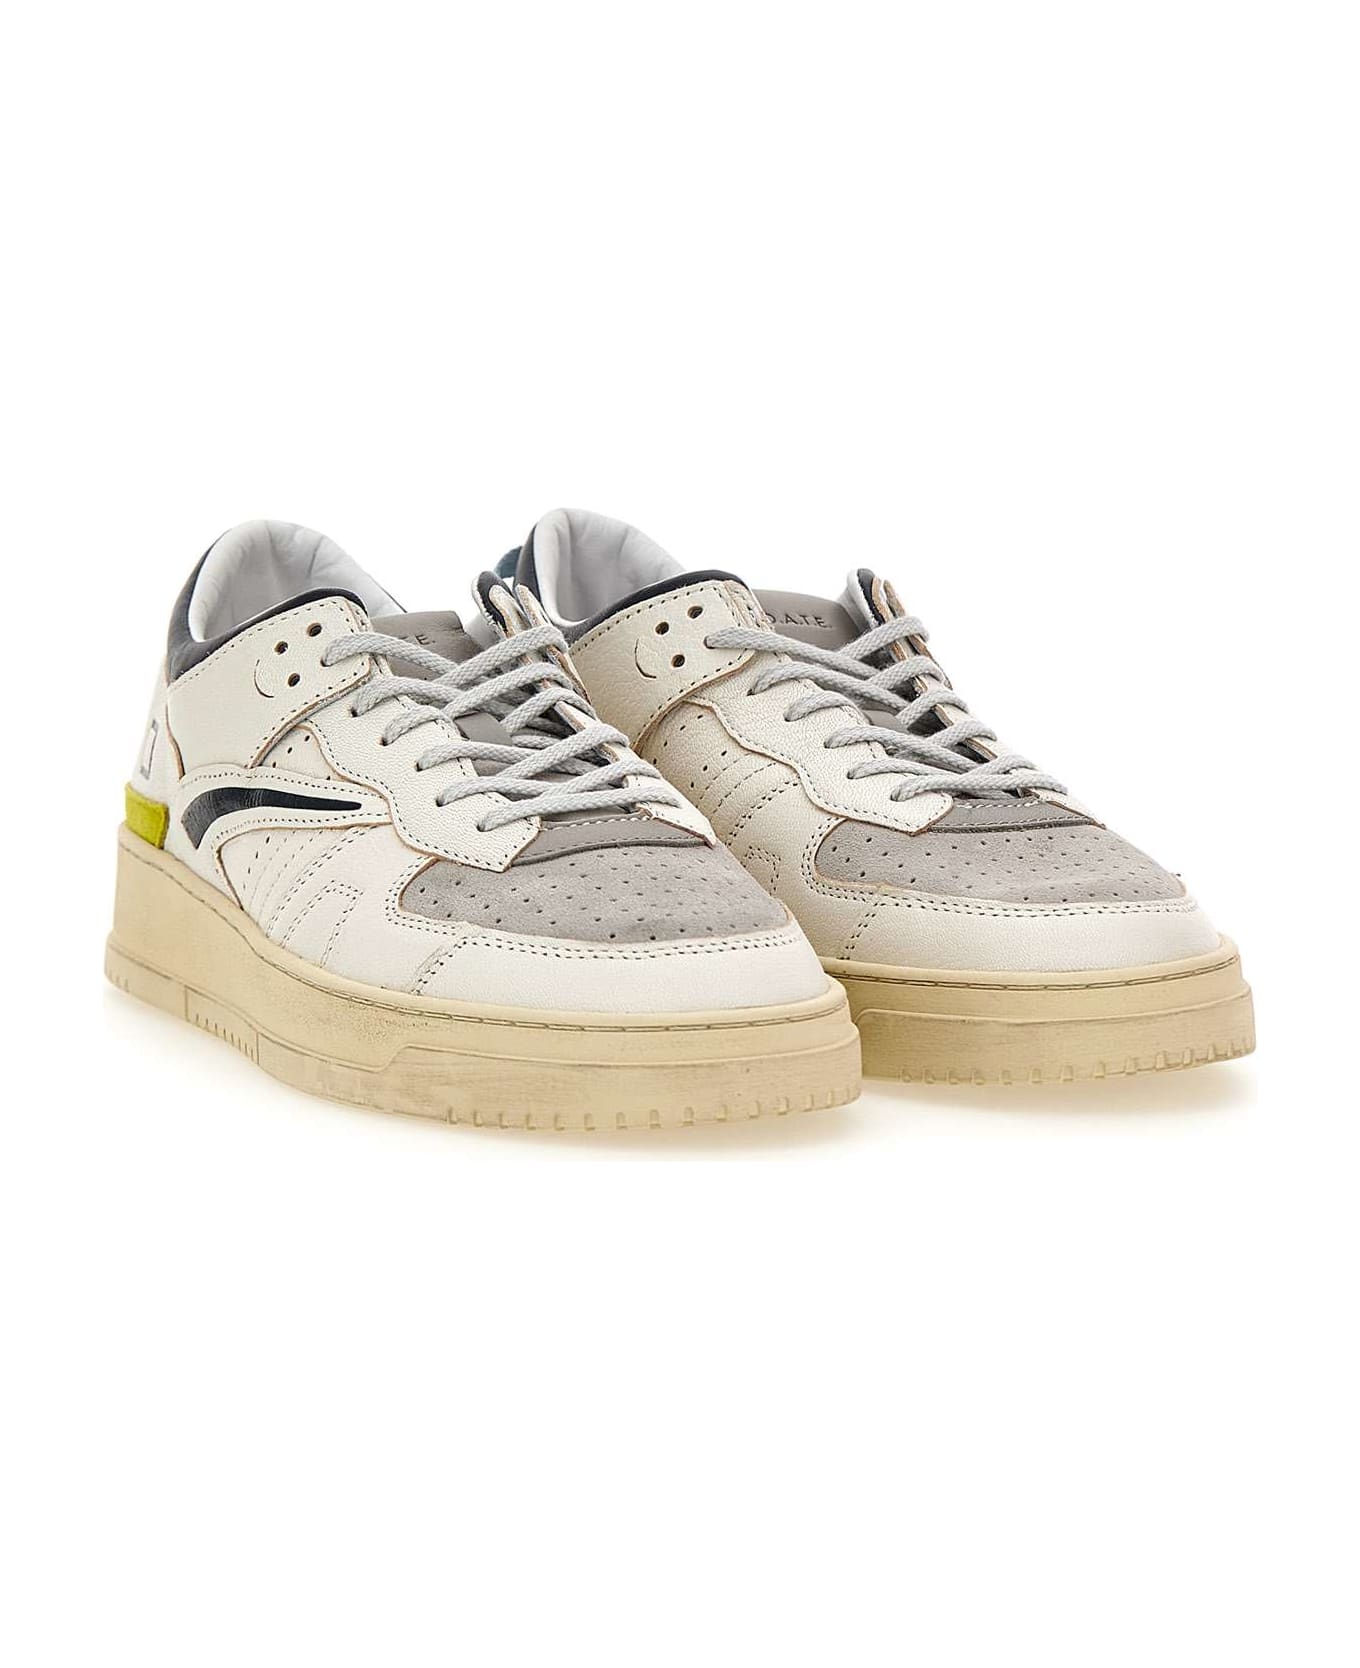 D.A.T.E. "torneo Colored" Leather Sneakers - WHITE